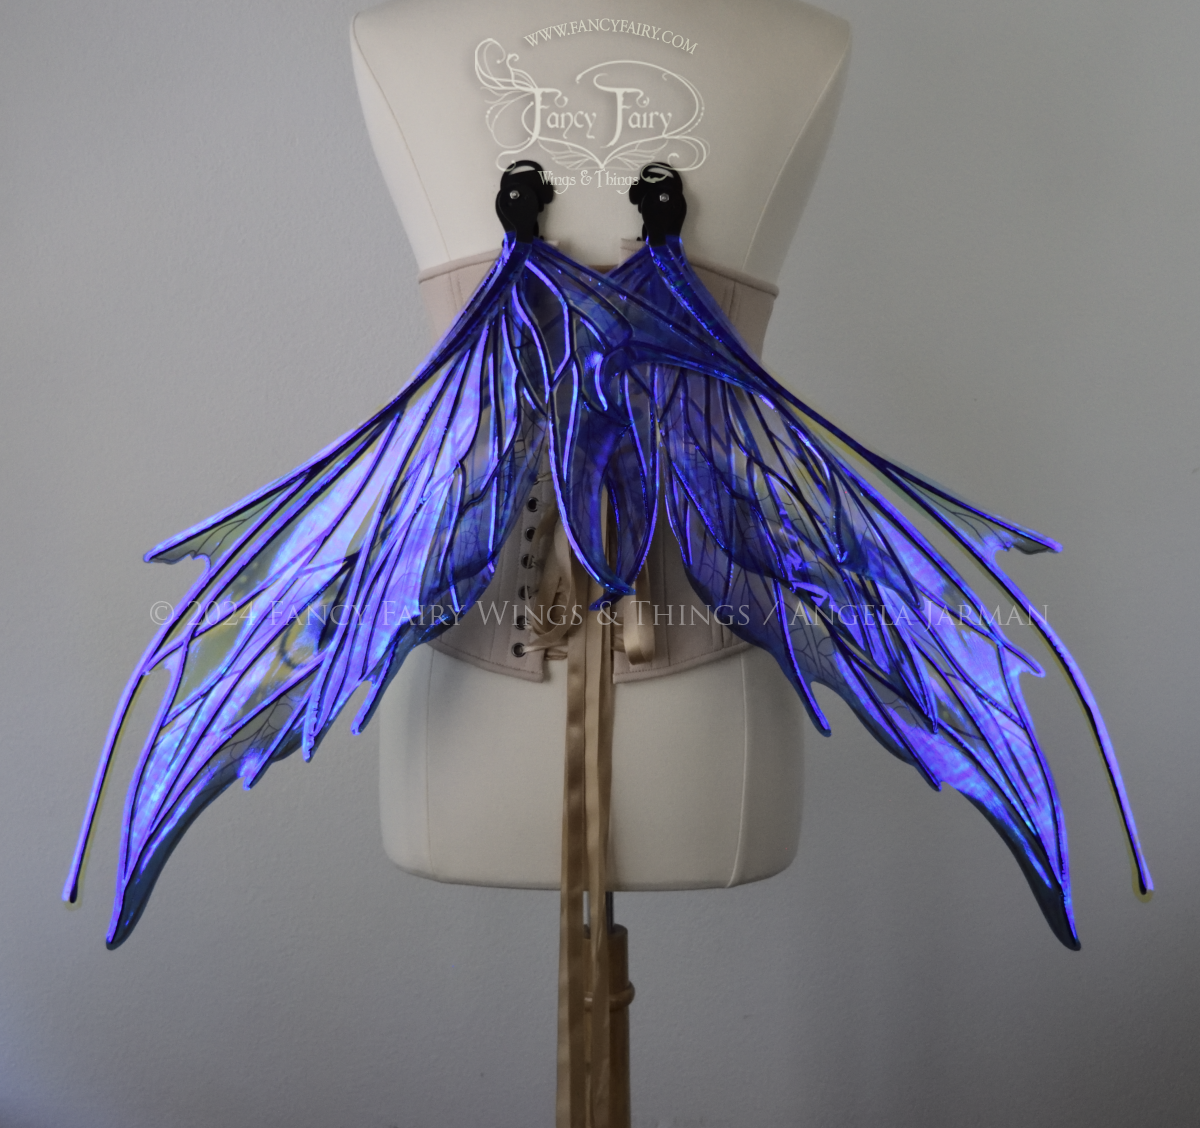 Back view of large spikey blue painted iridescent fairy wings with antennae along the top & black detailed veins, displayed on dress form in resting position. 